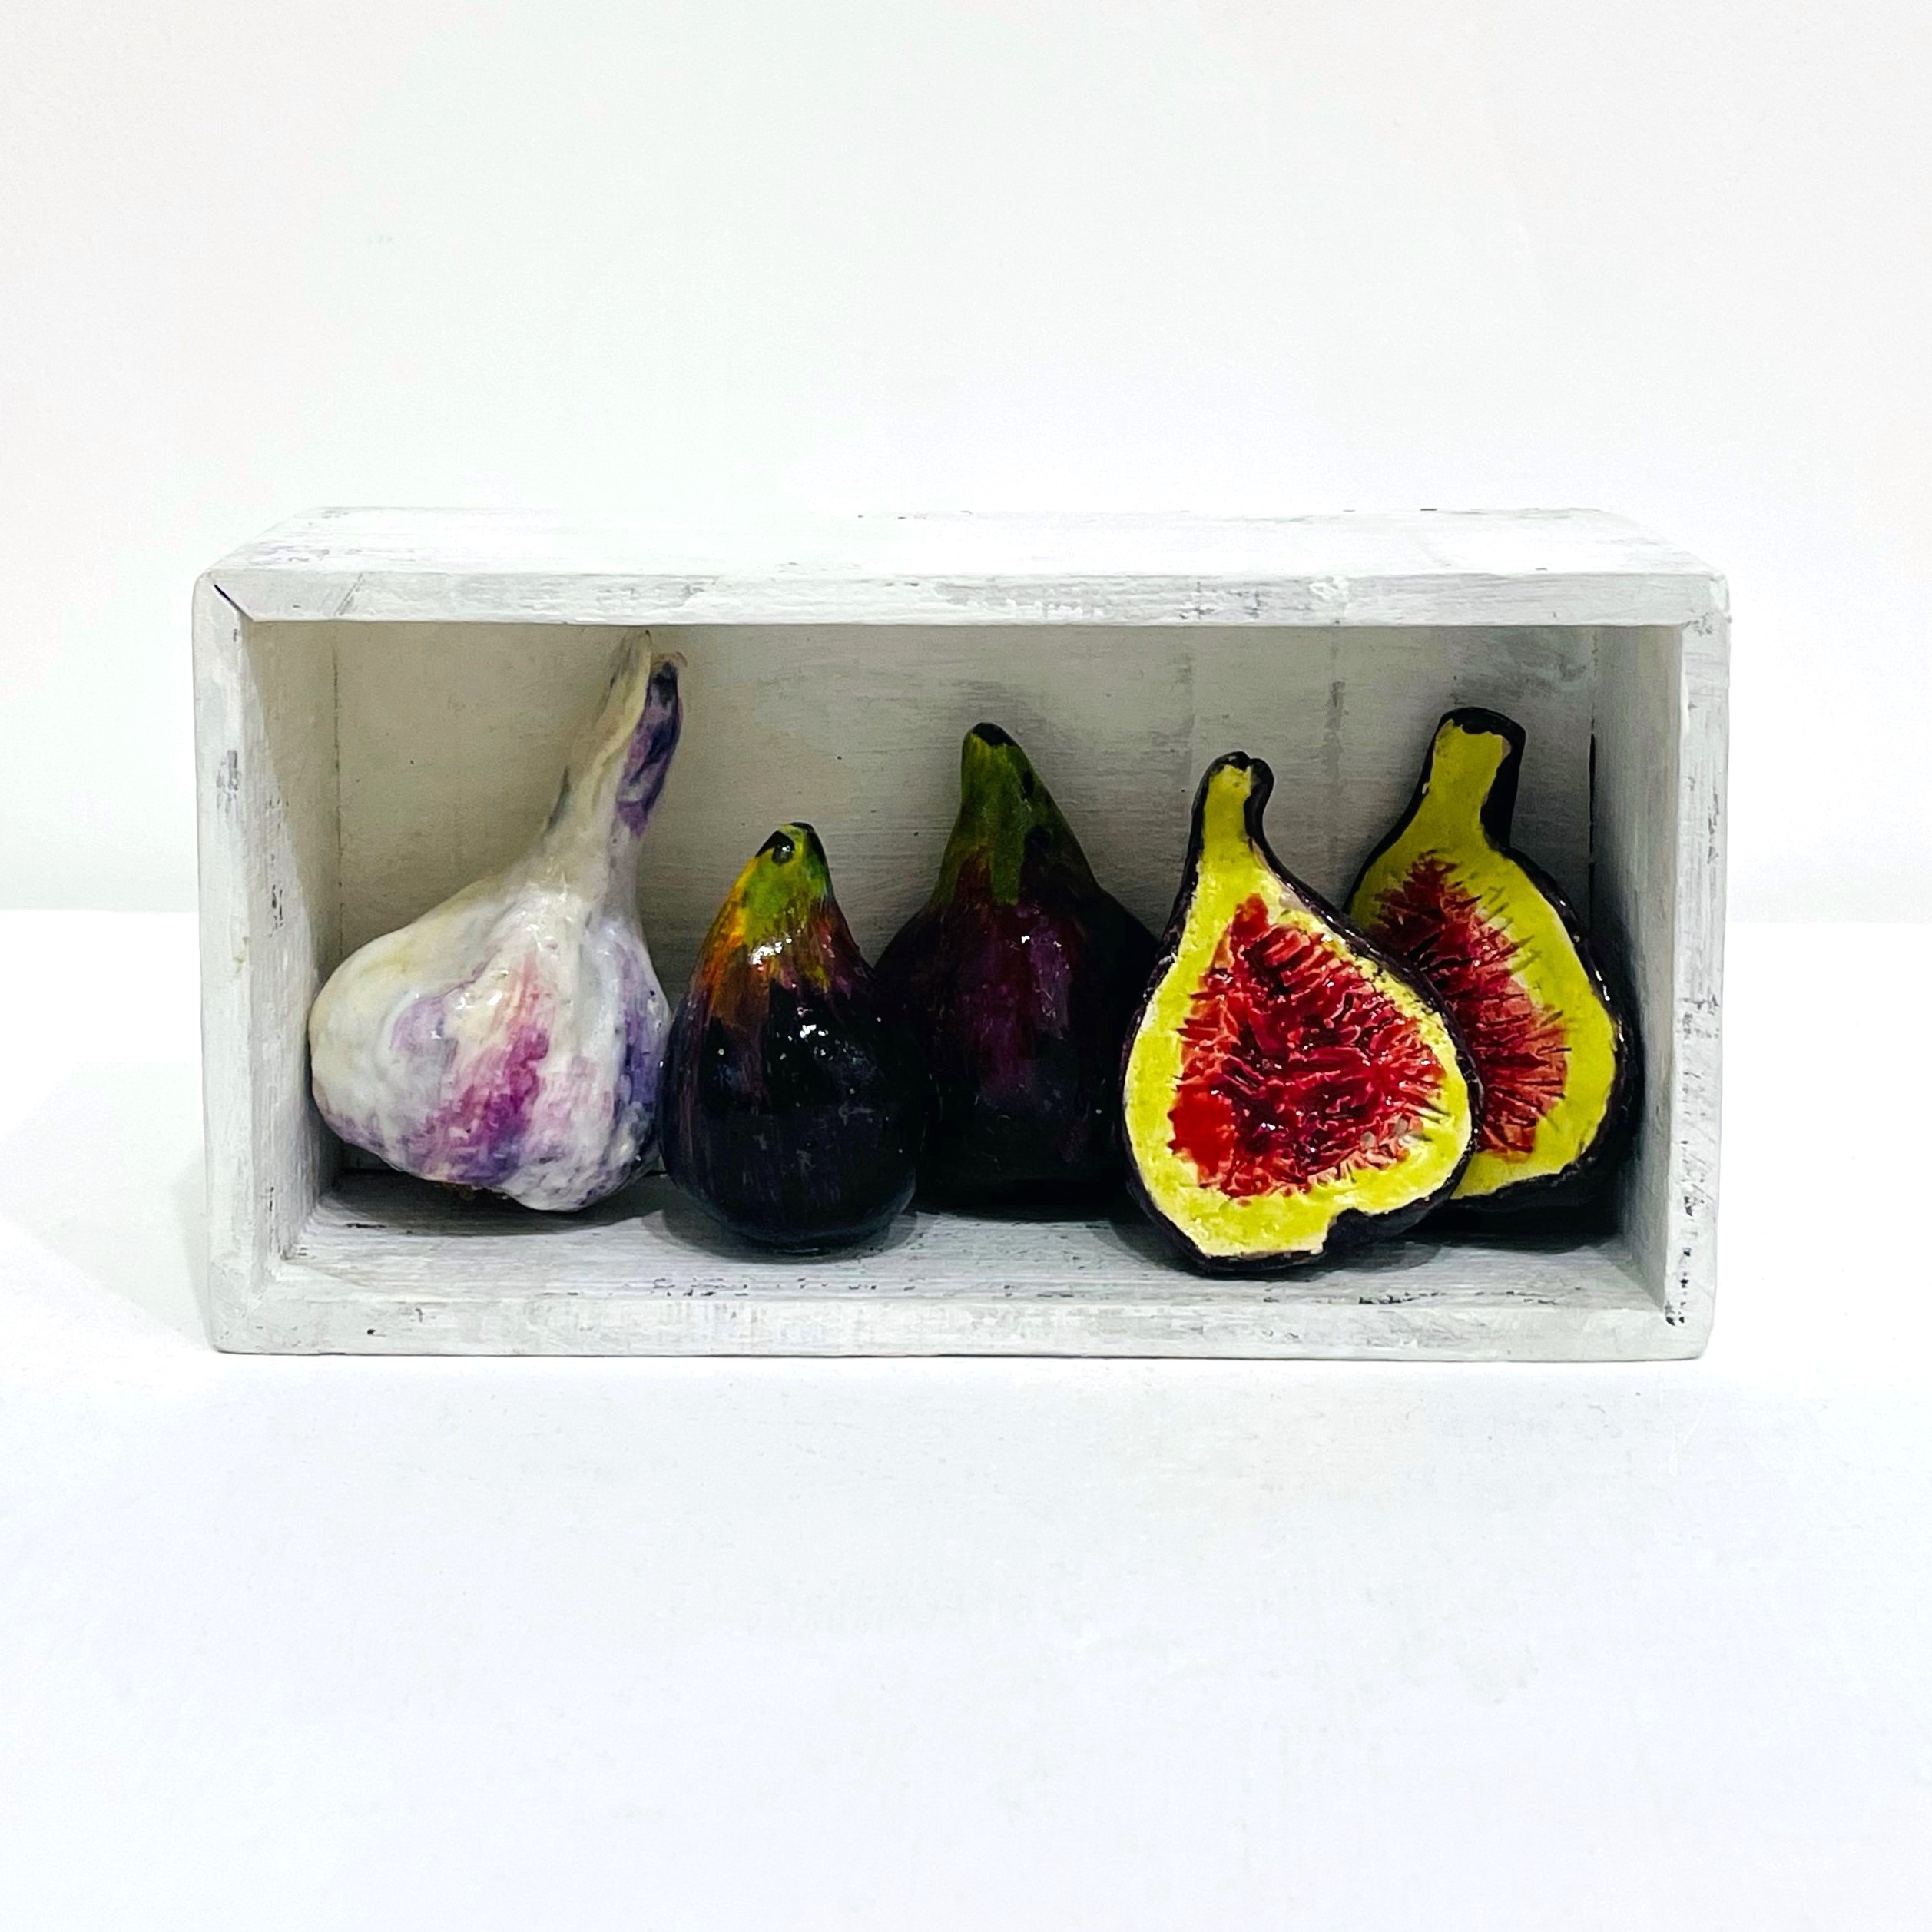 'The Miniature Pantry: Figs & Garlic' by artist Diana Tonnison